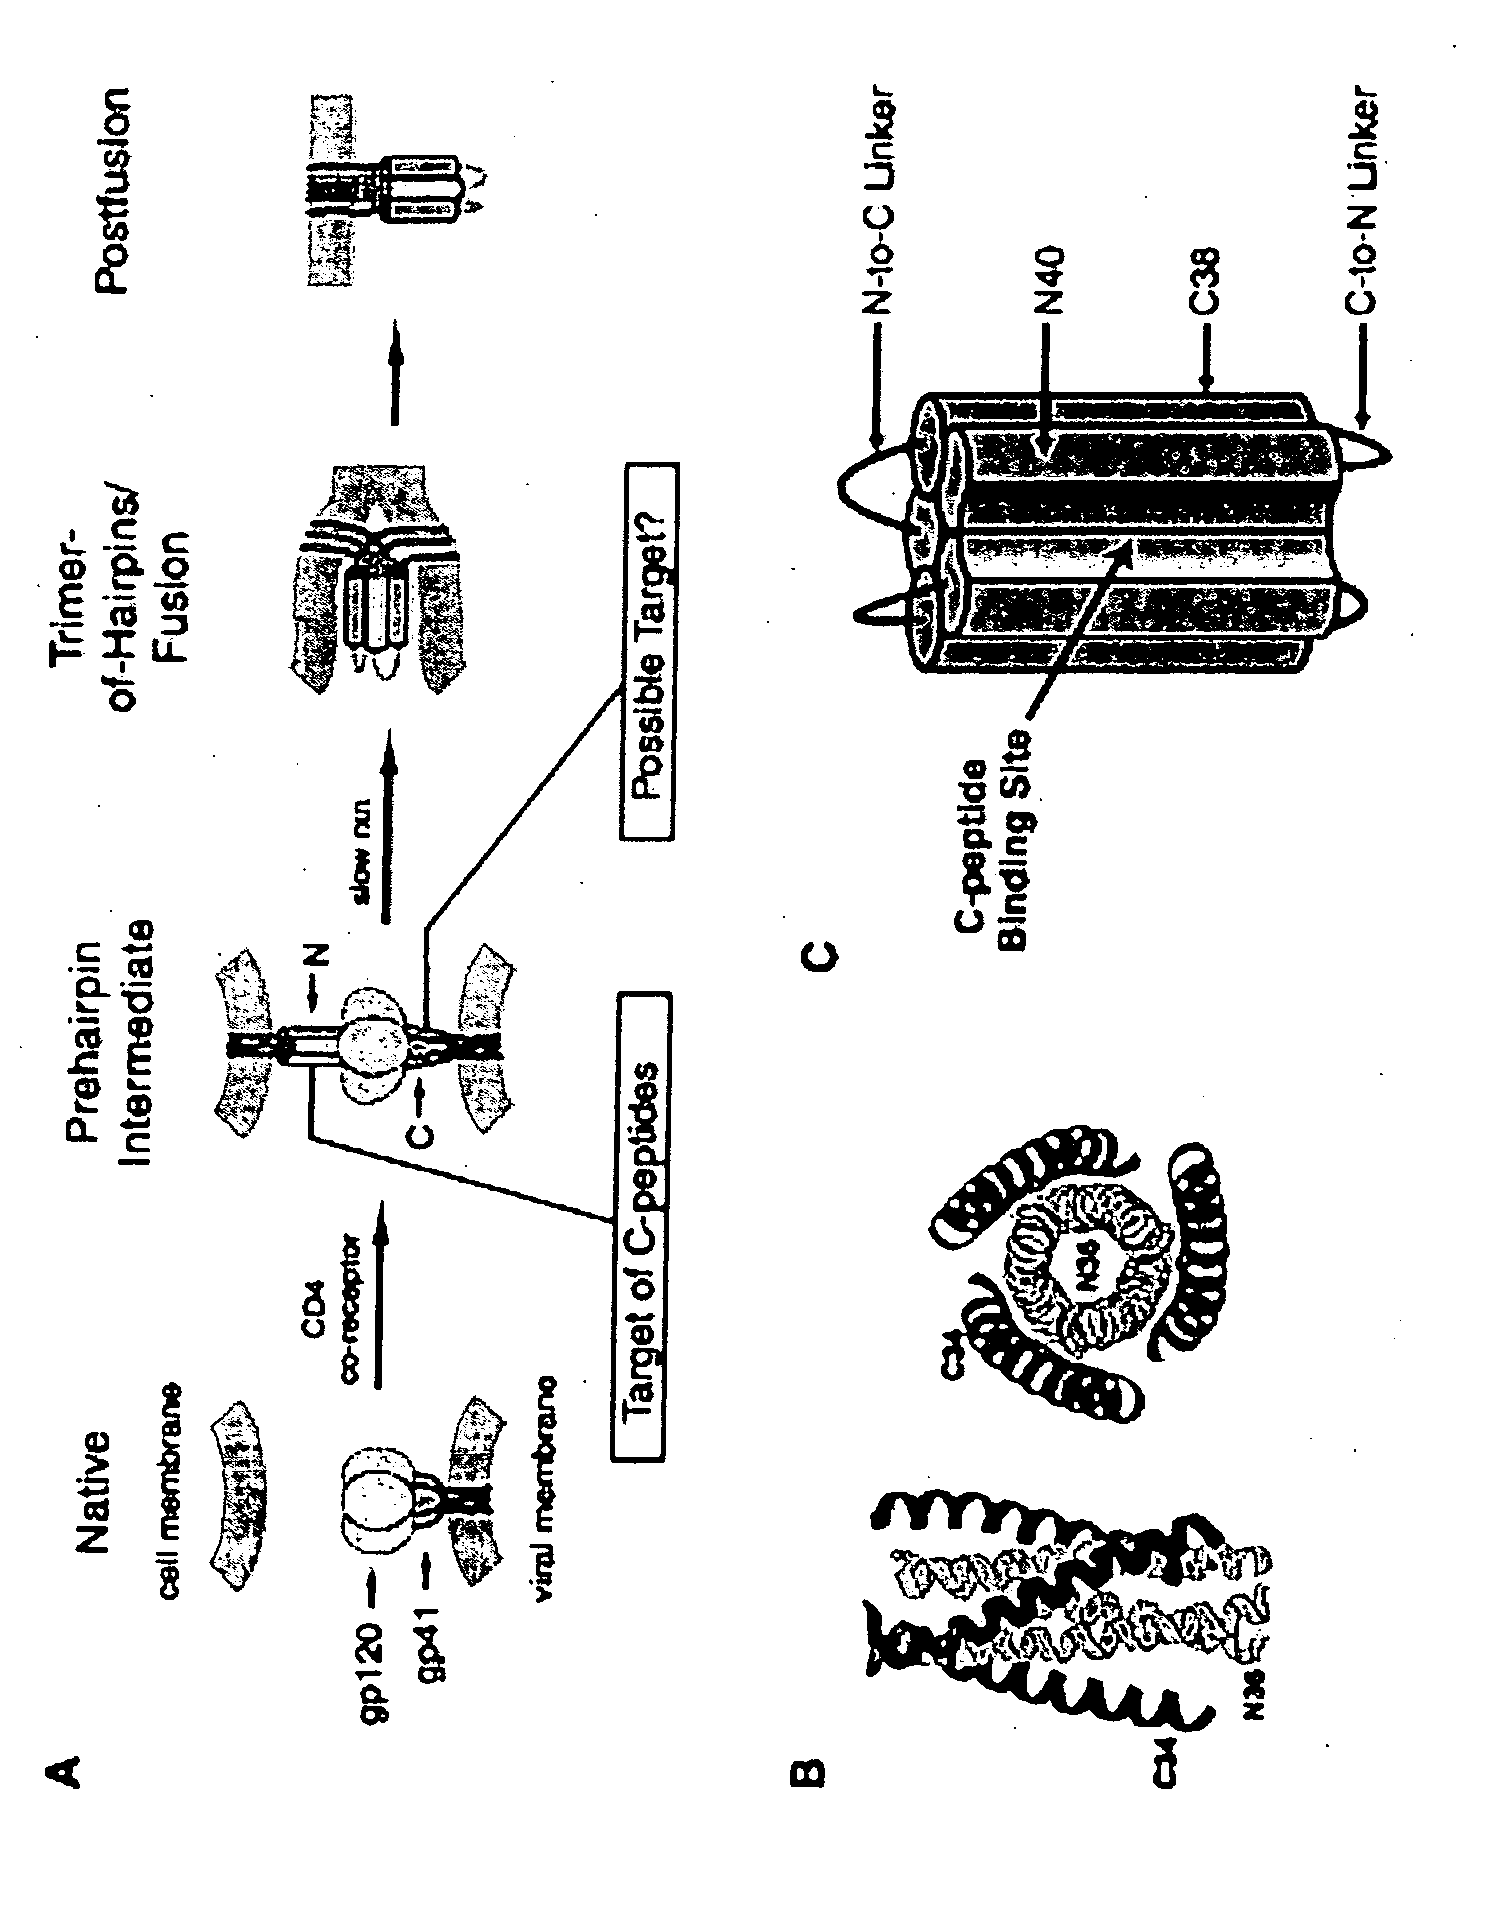 Designed antigens to elicit neutralizing antibodies against sterically restricted antigen and method of using same